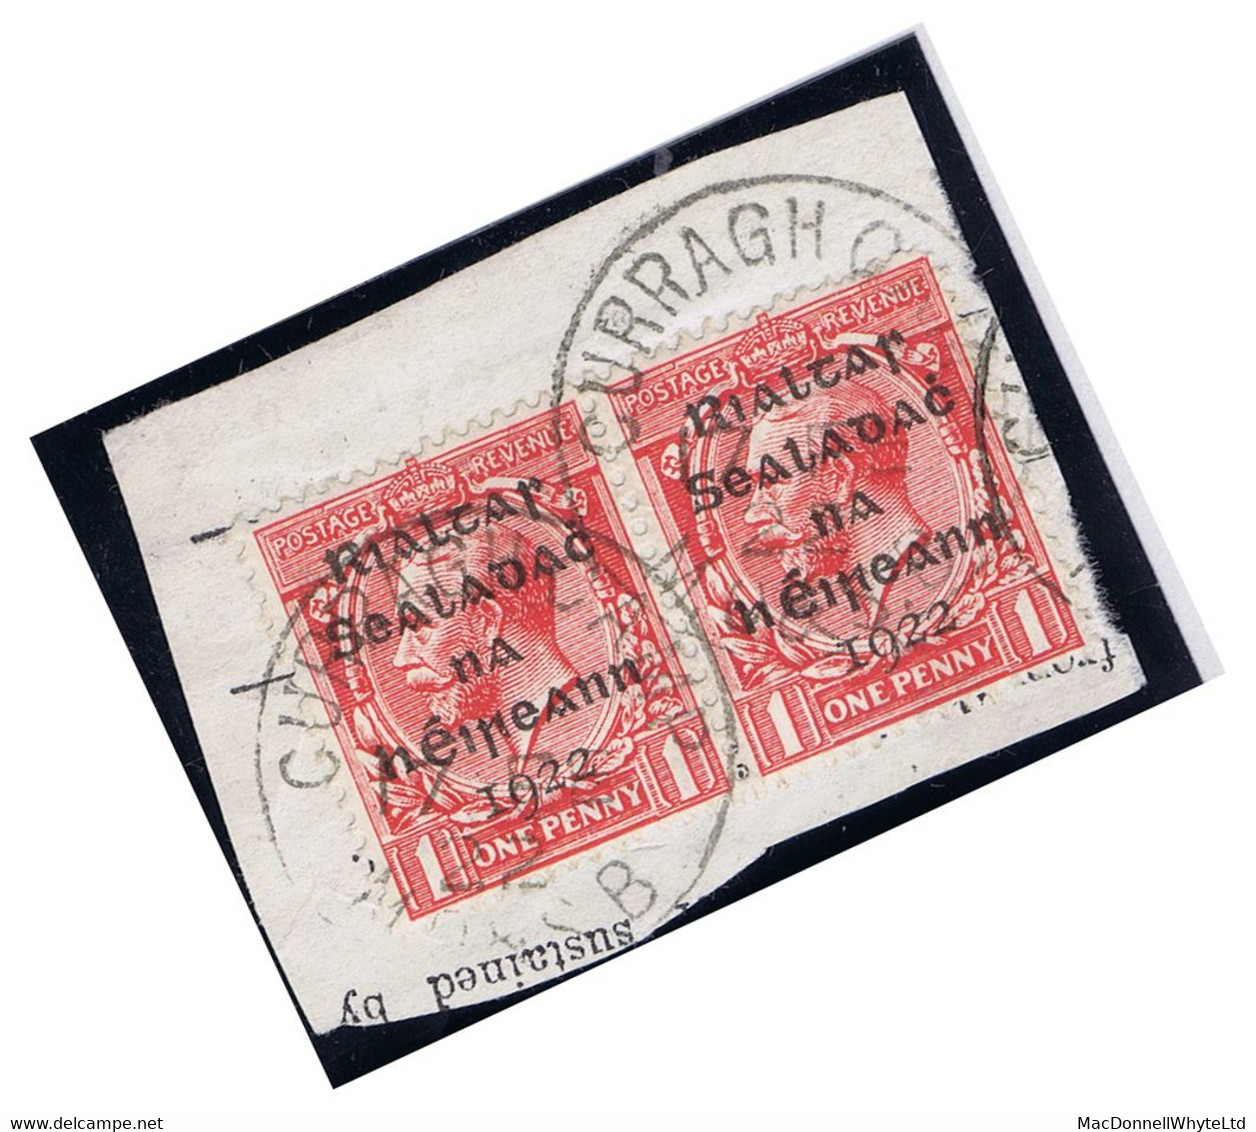 Ireland Military Kildare First Day Issue 1922 Dollard Rialtas 1d Pair Used On Piece CURRAGH CAMP MO&SB 17 FE 22 - Used Stamps